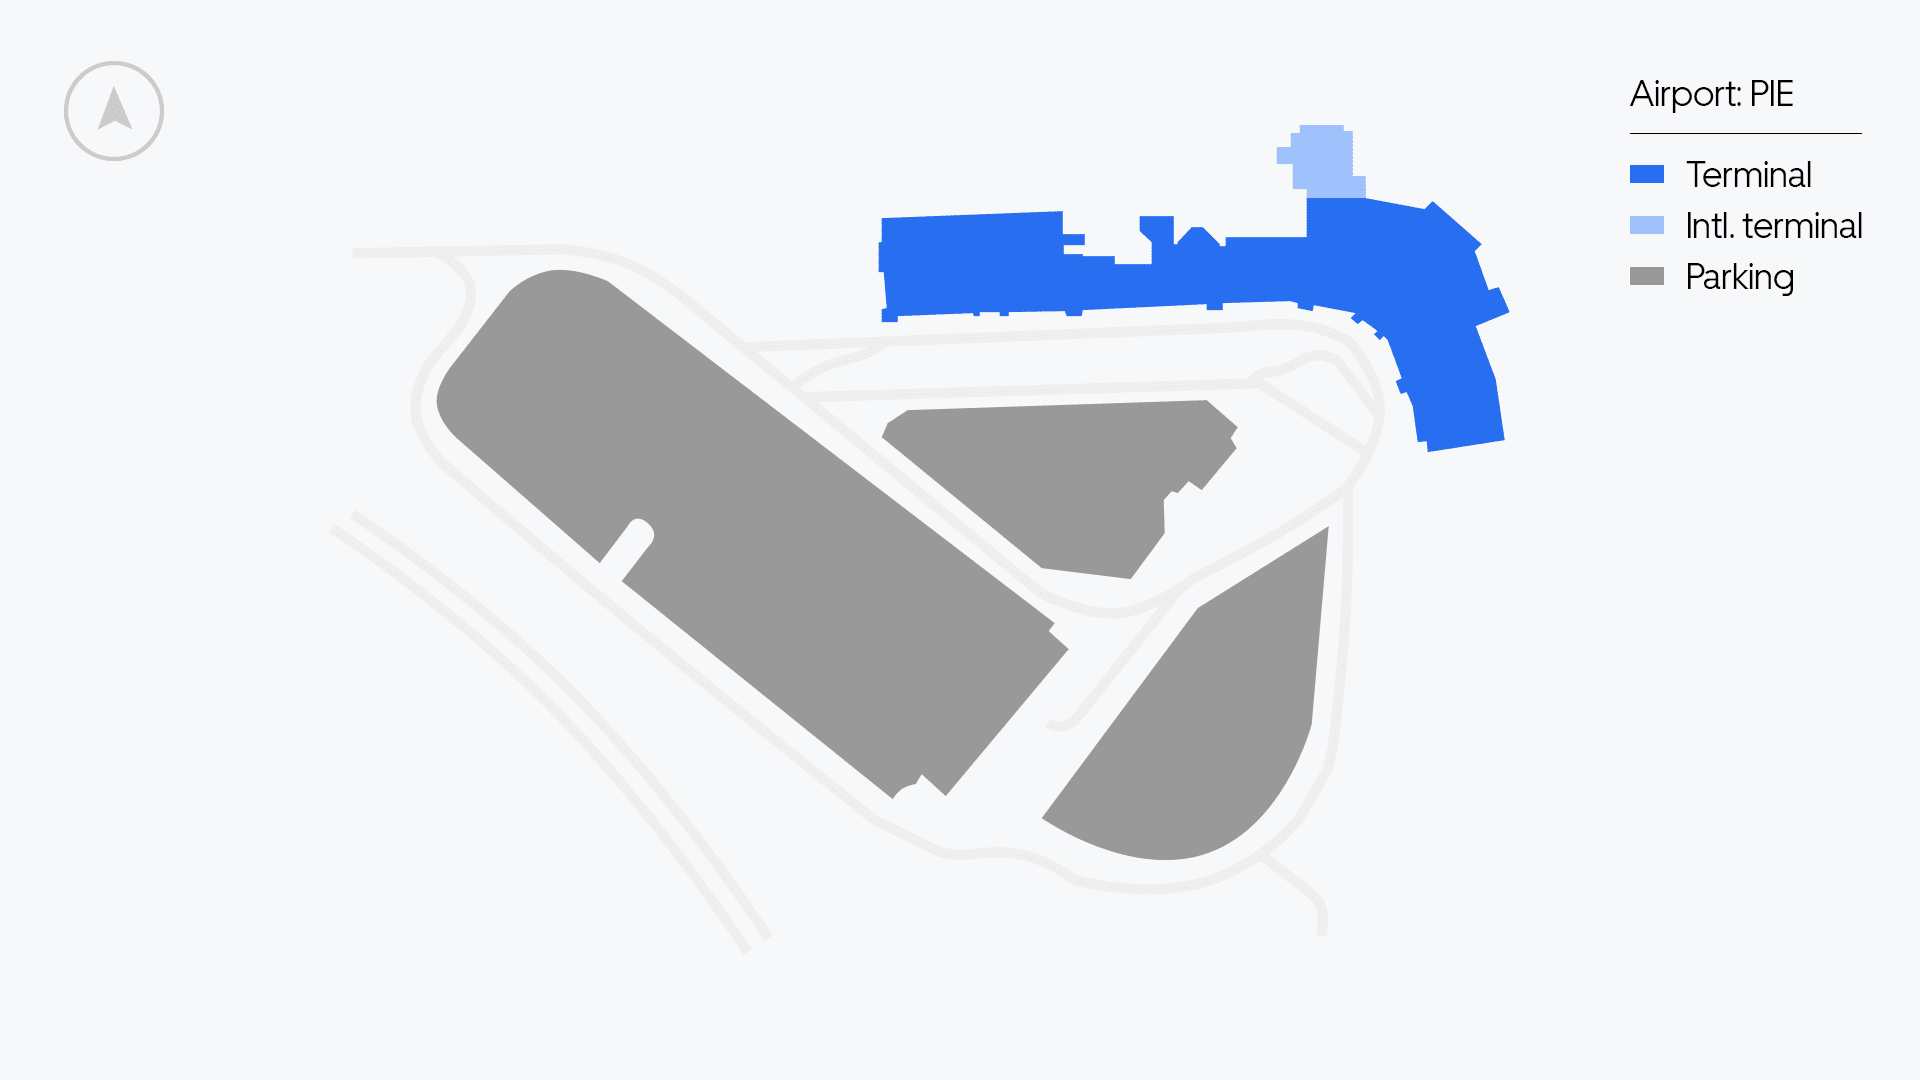 PIE Airport map